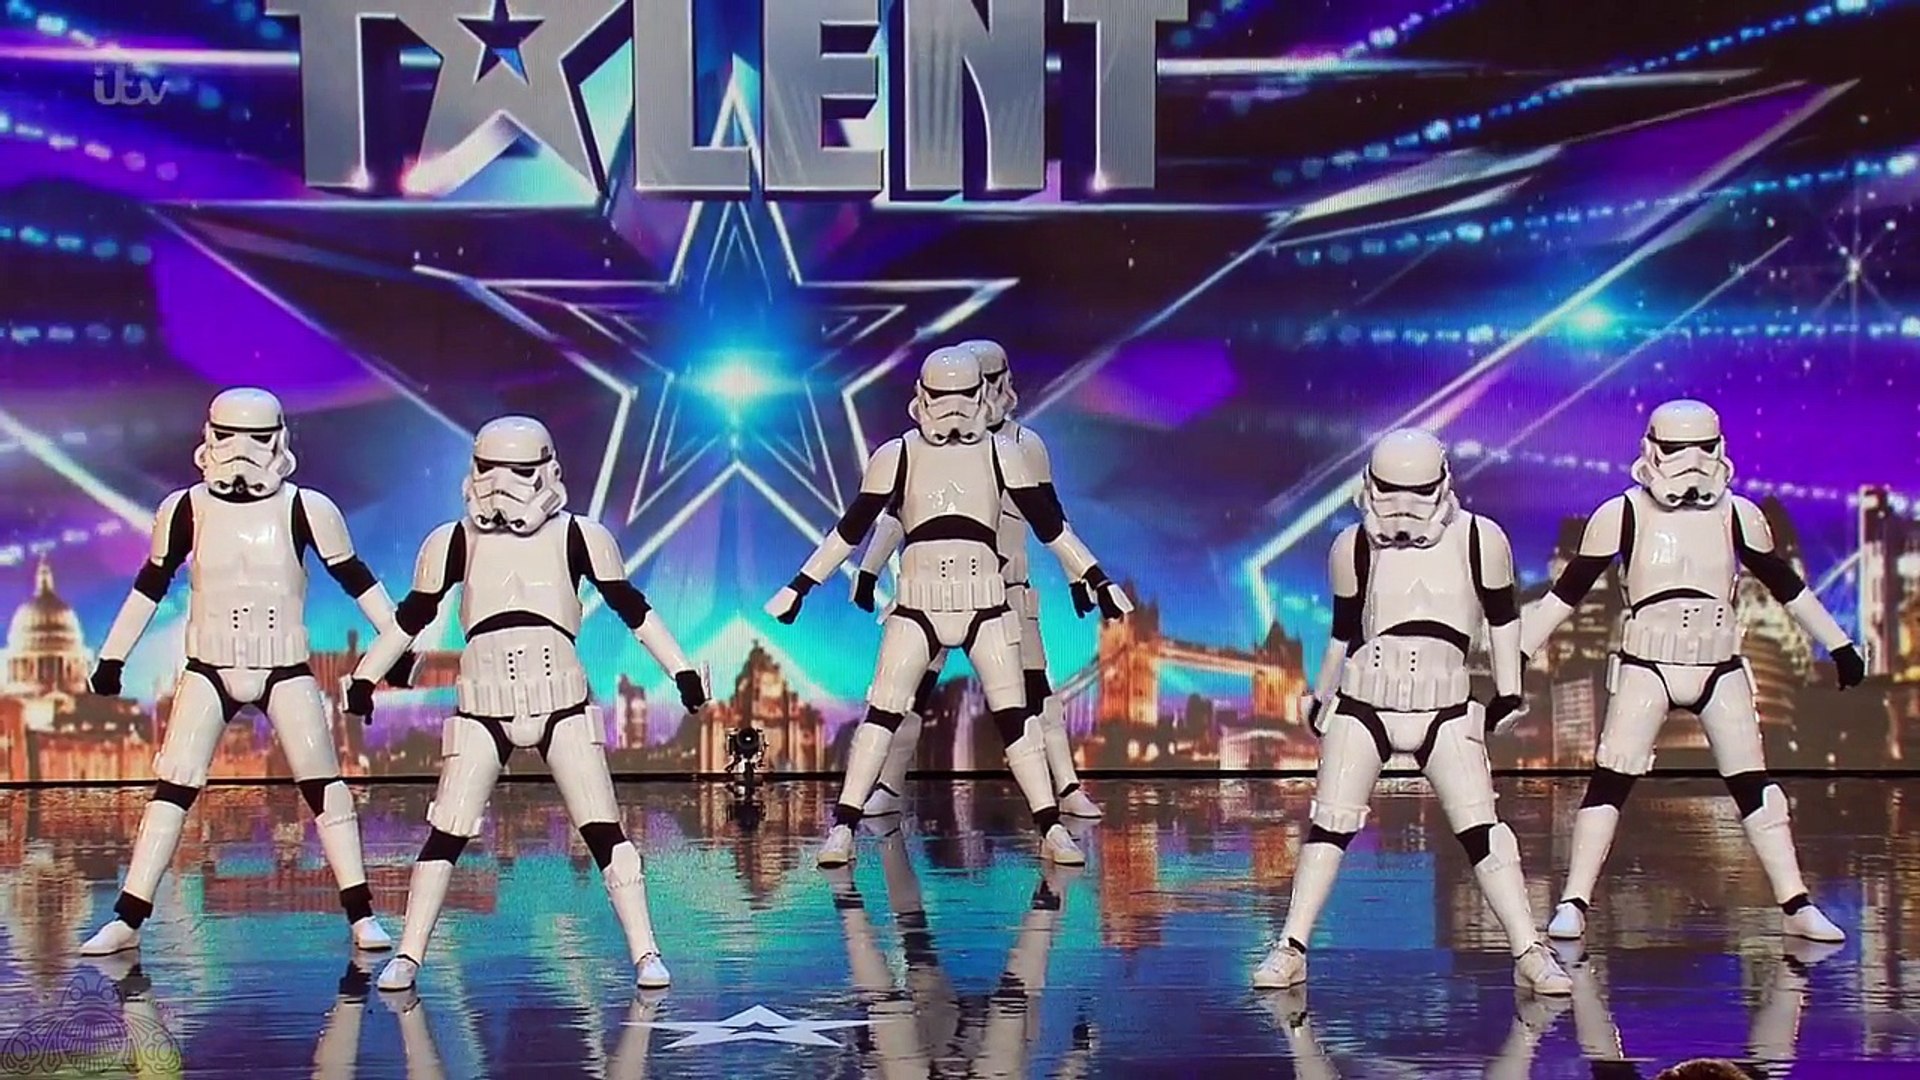 Britain's Got Talent 2016 S10E05 Boogie Storm Star Wars Inspired Cosplay  Dance Crew L Audition - Dailymotion Video